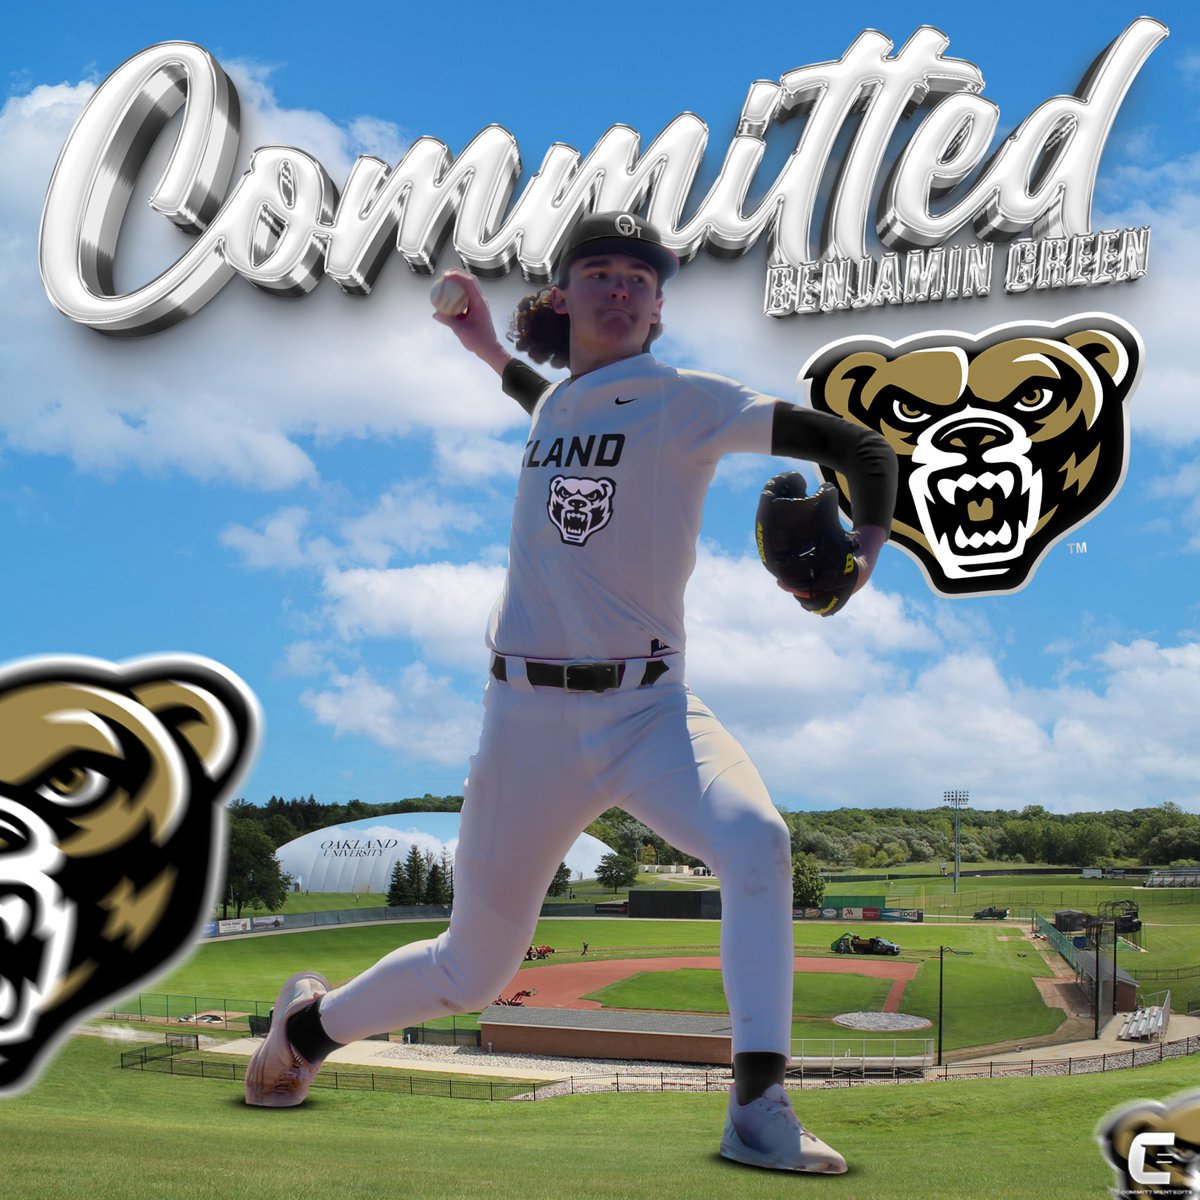 I’m excited to announce my commitment to Oakland University to continue my academic and athletic career. I am grateful for the support of my family, friends and coaches over the years to help me get to this point. Go Grizzlies 🐻!